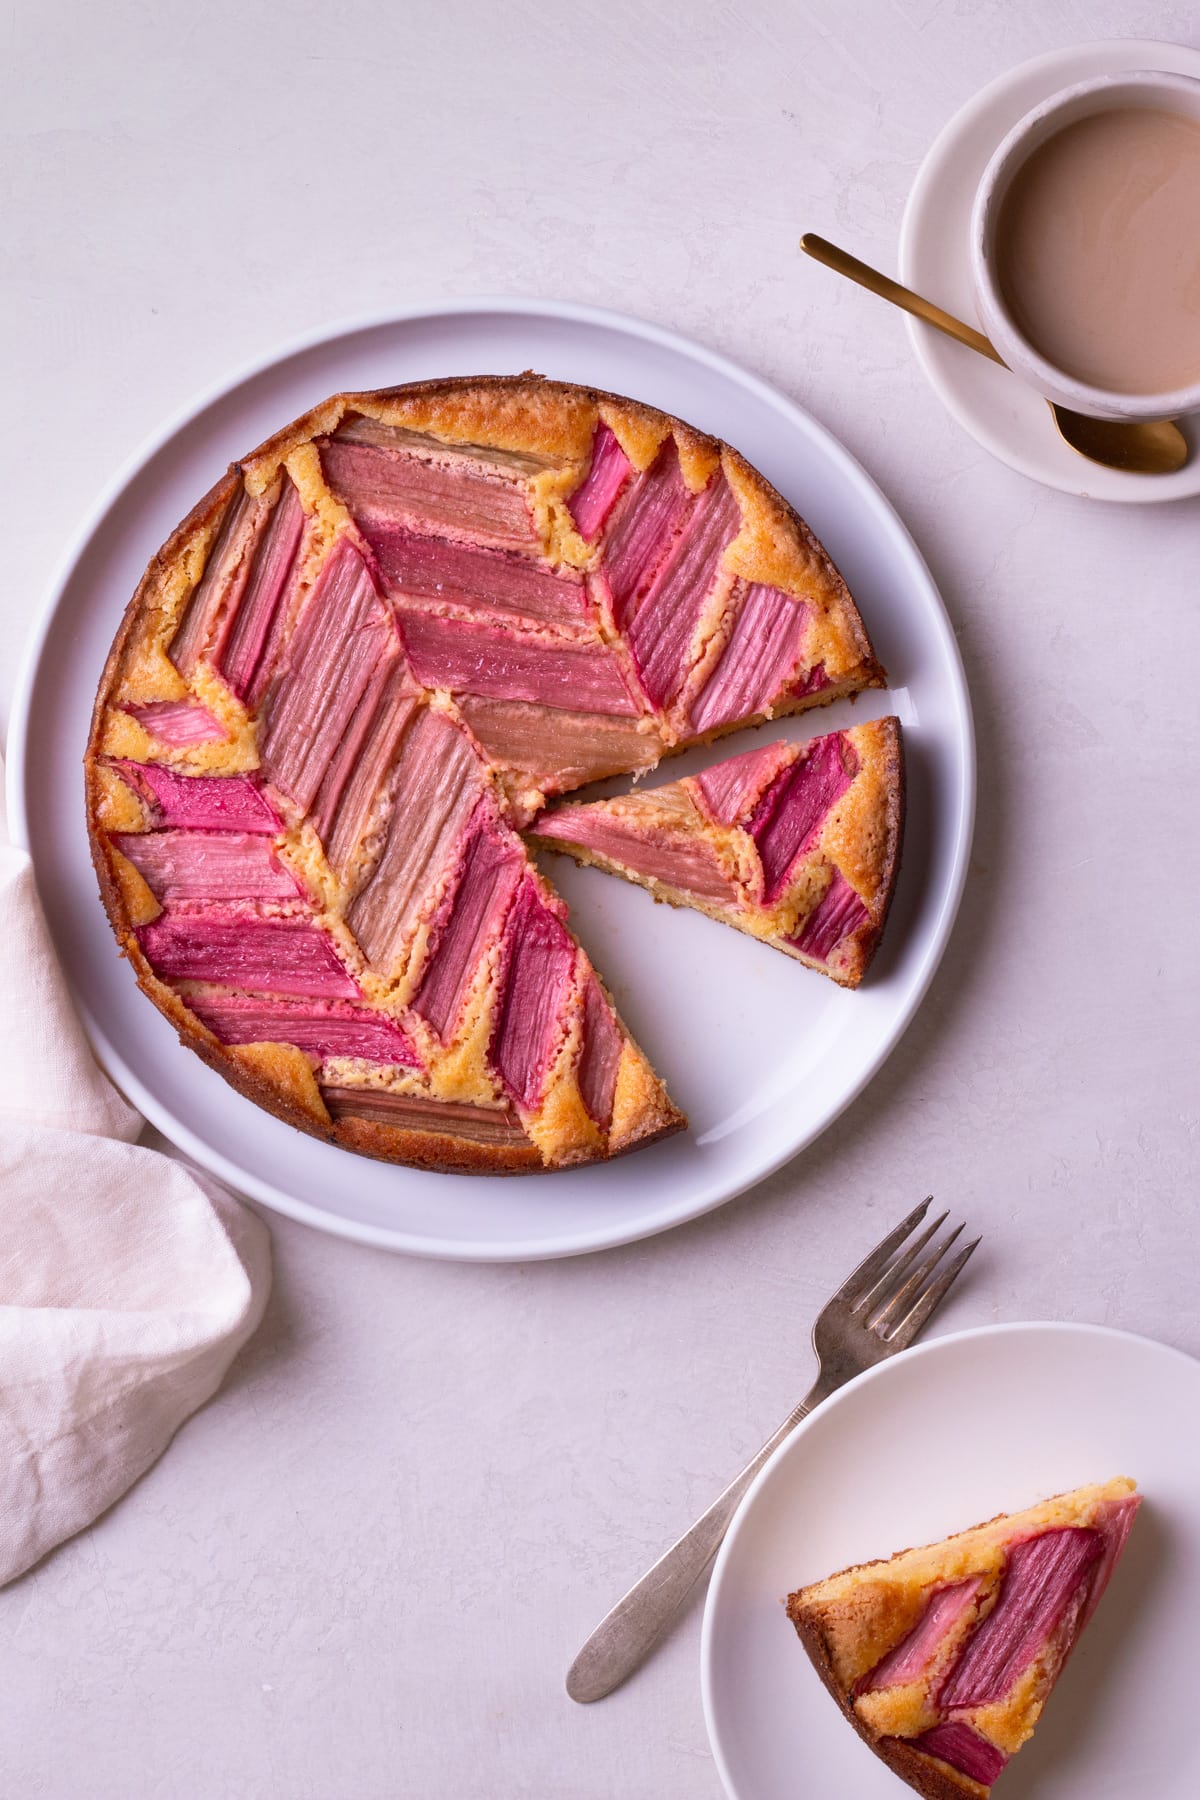 Overhead view of Rhubarb Custard Cake with slices cut out of it on a cream surface surrounded by a cup of coffee and a slice of cake.